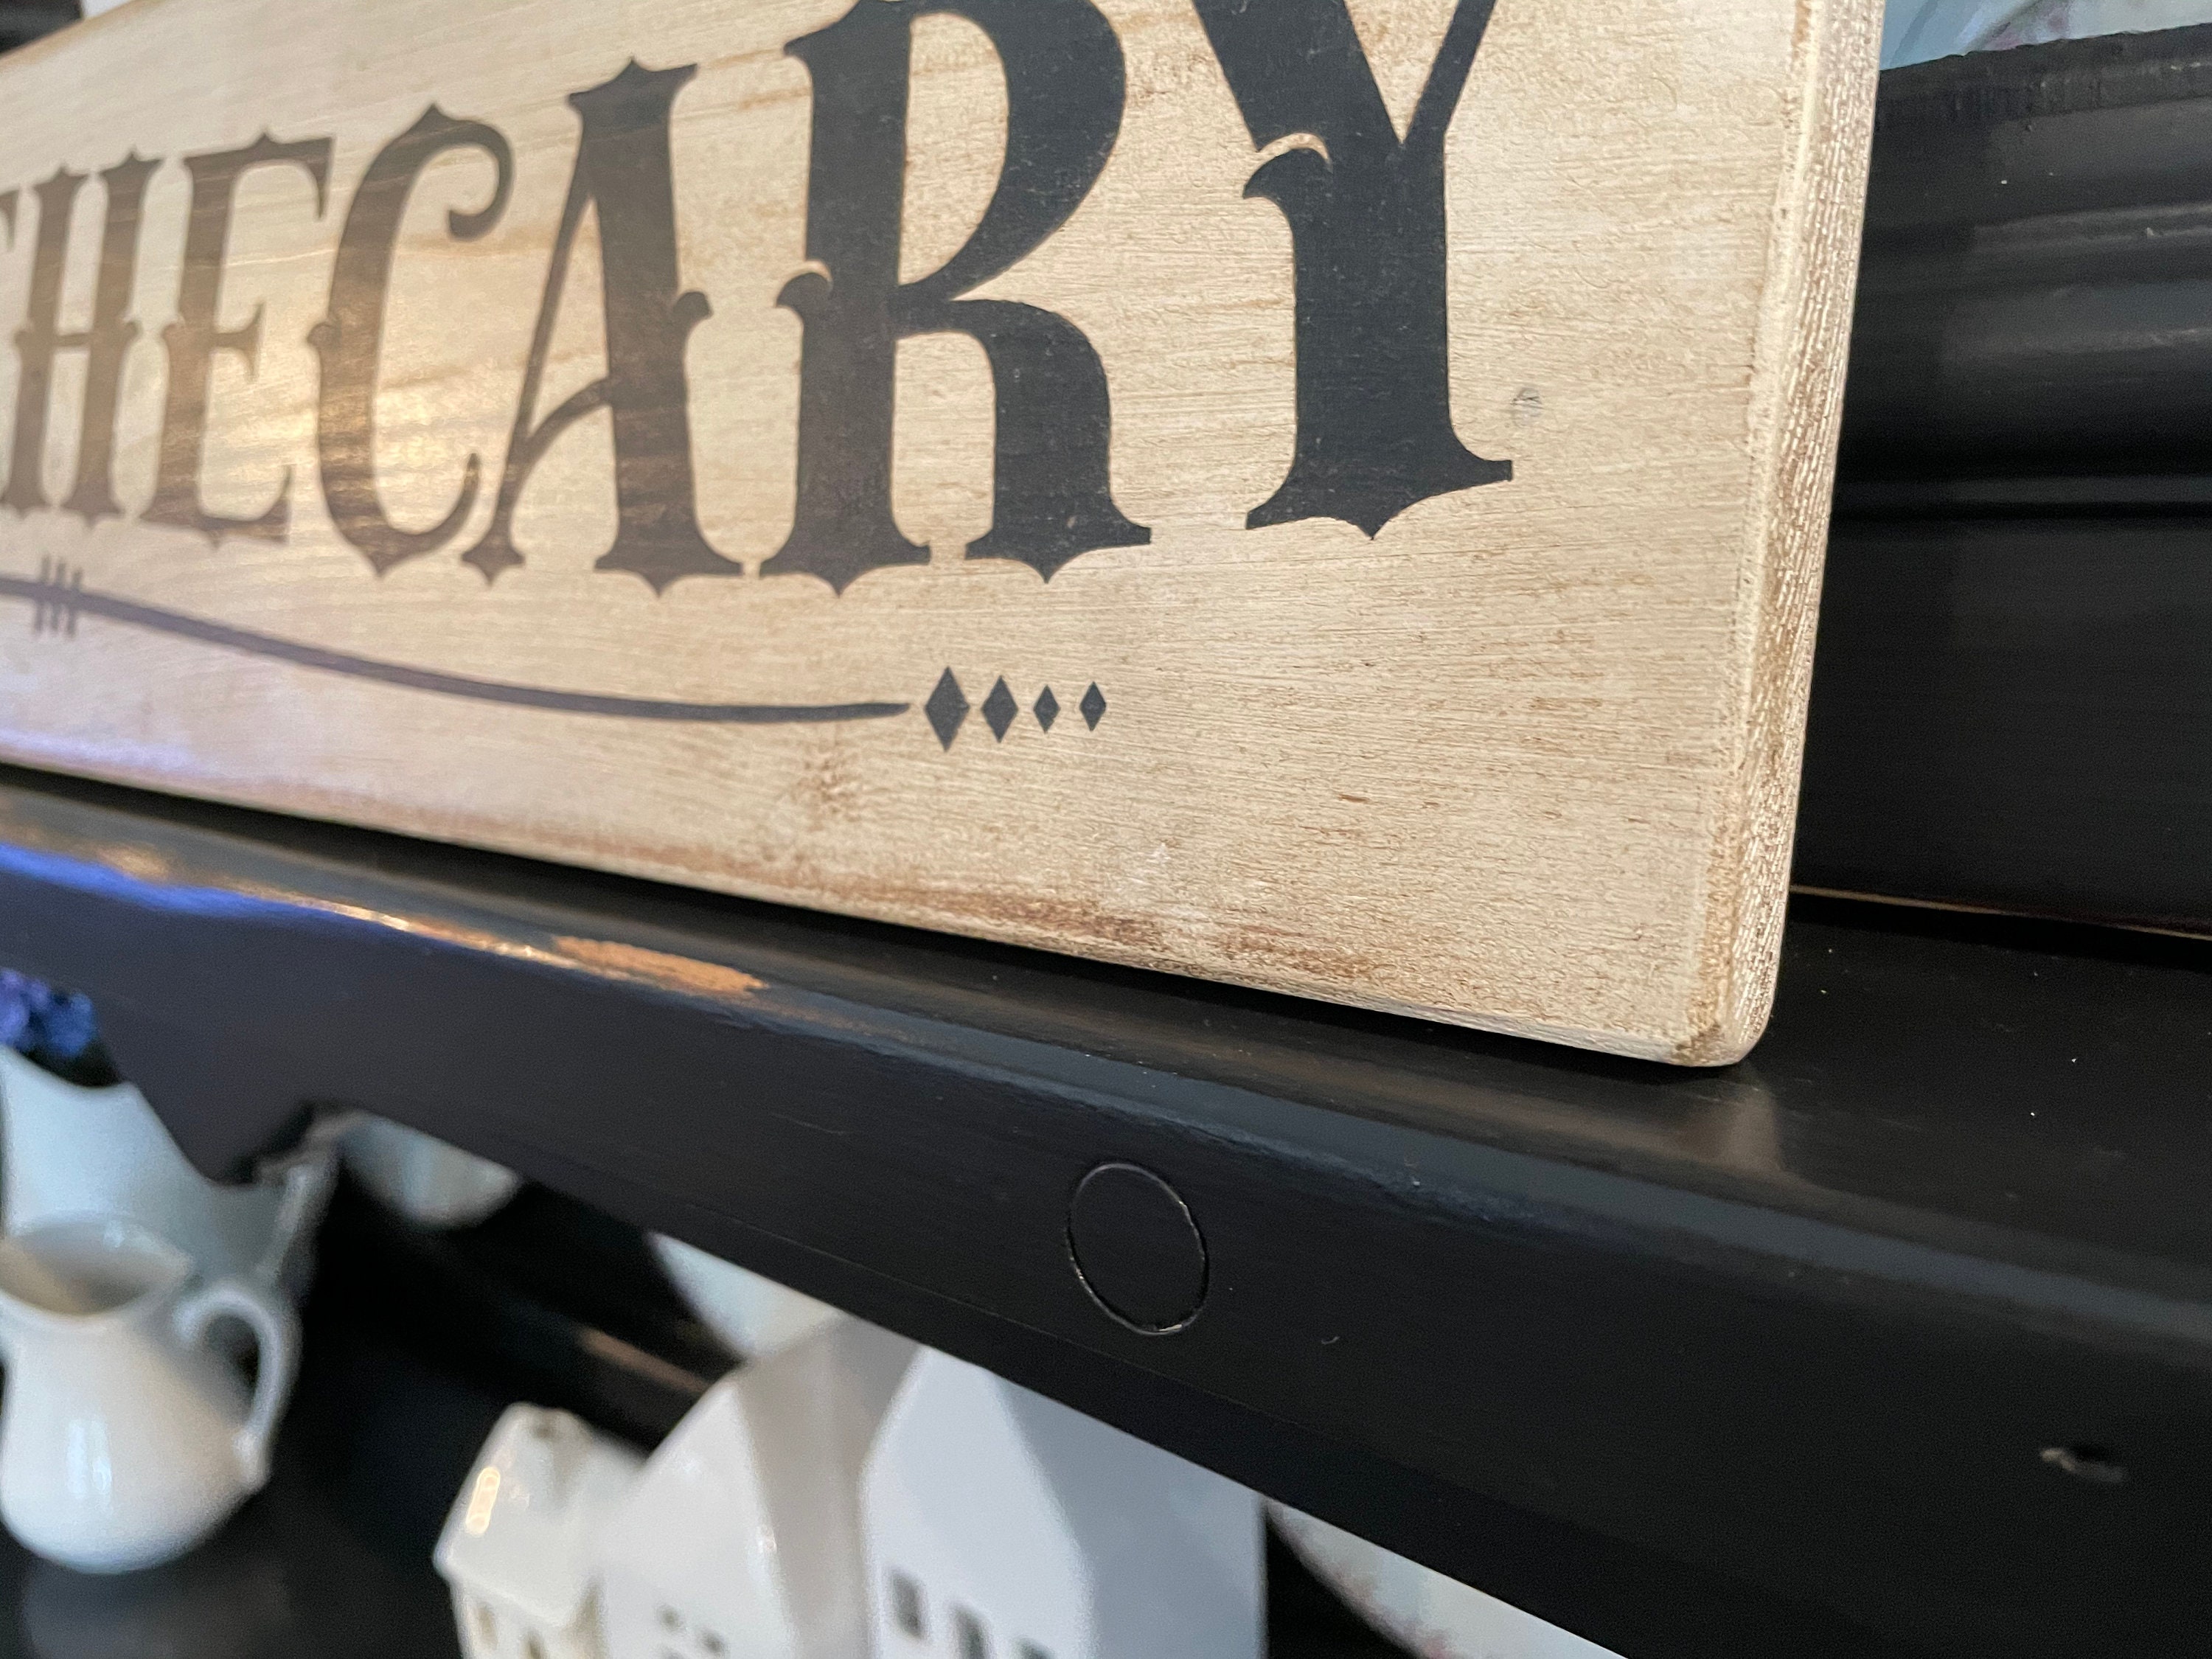 Apothecary Shoppe Personalized Sign – A Simpler Time